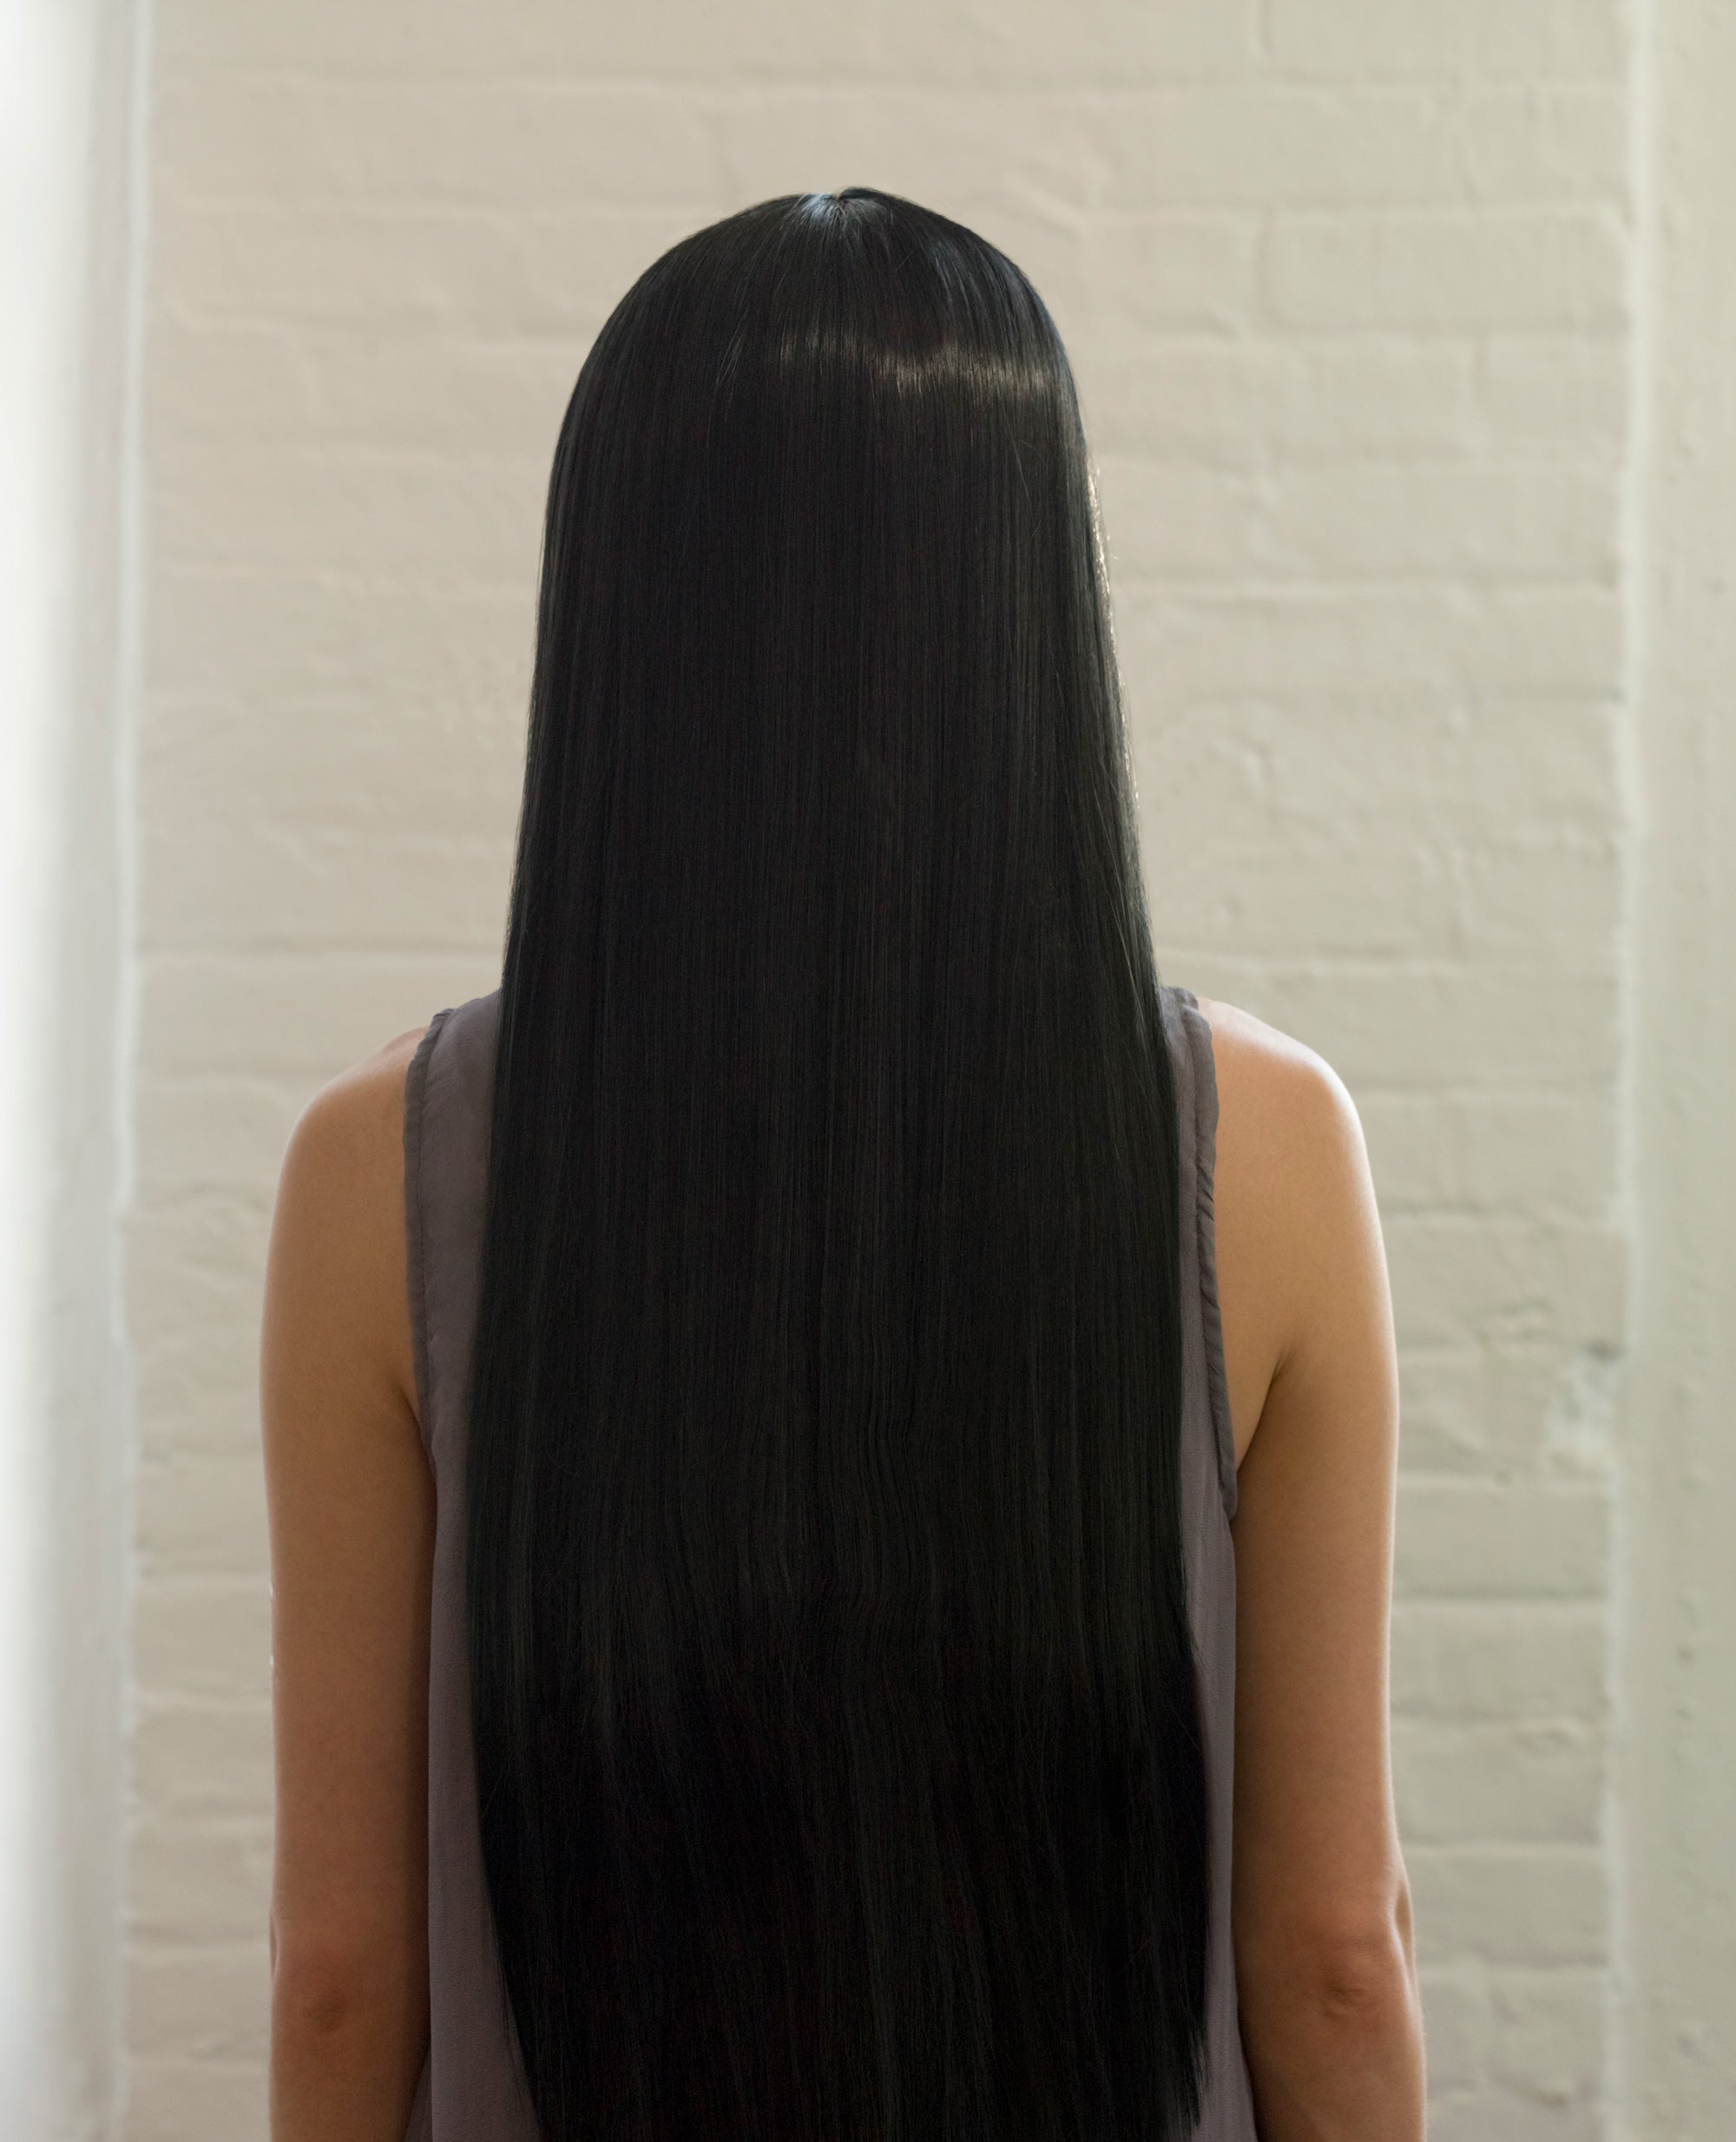 Japanese Hair Straightening: What You Need To Know